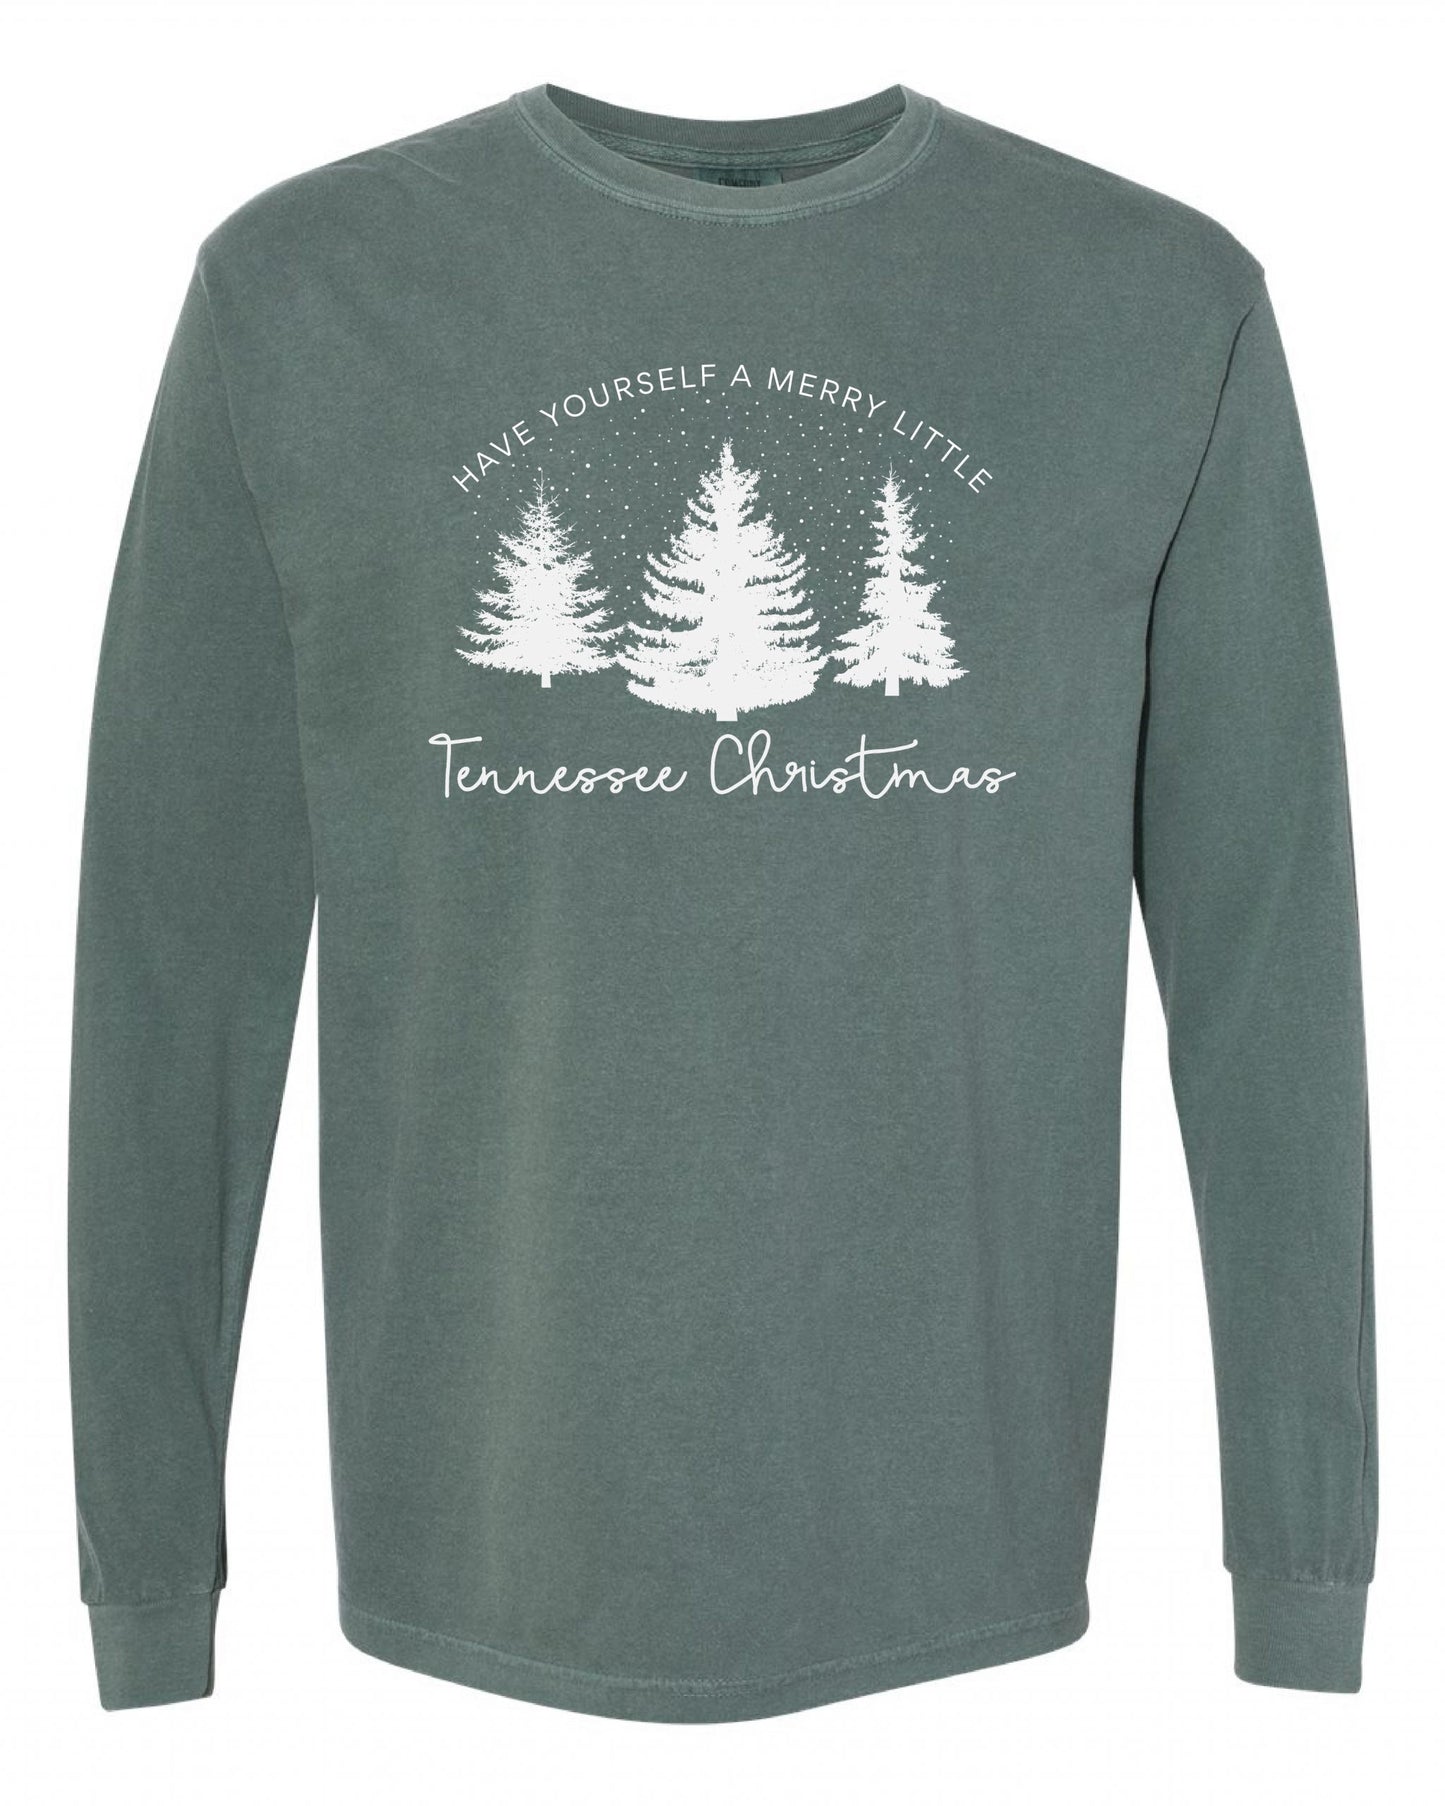 Have Yourself A Merry Little Tennessee Christmas Long Sleeve